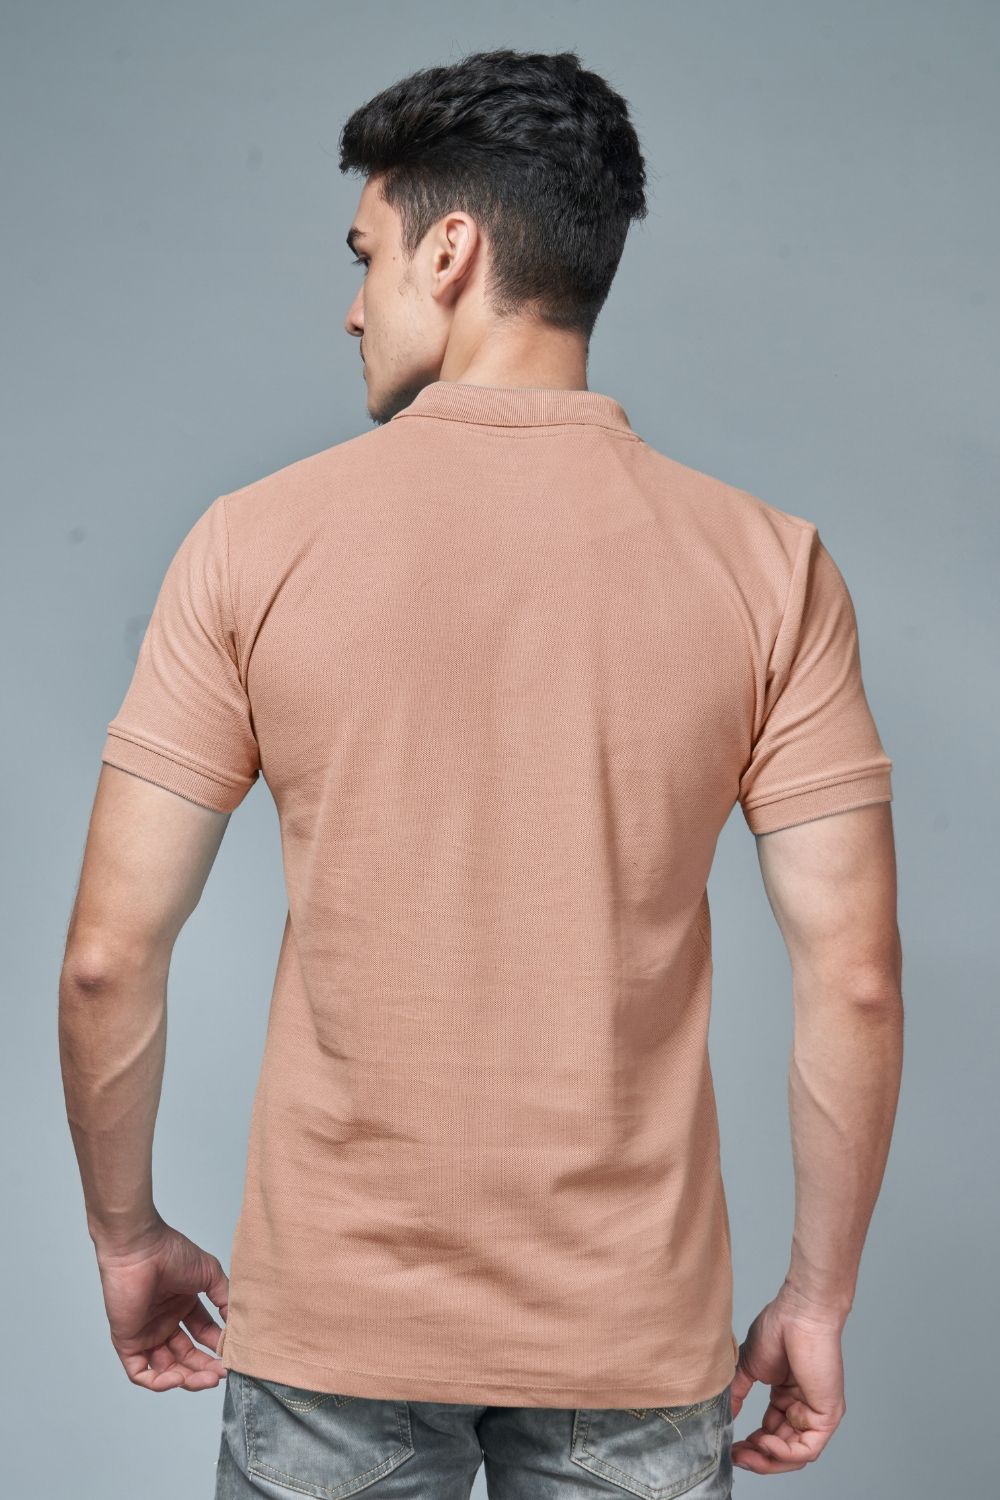 Bisque colored, identity Polo T-shirts for men with collar and half sleeves, back view.